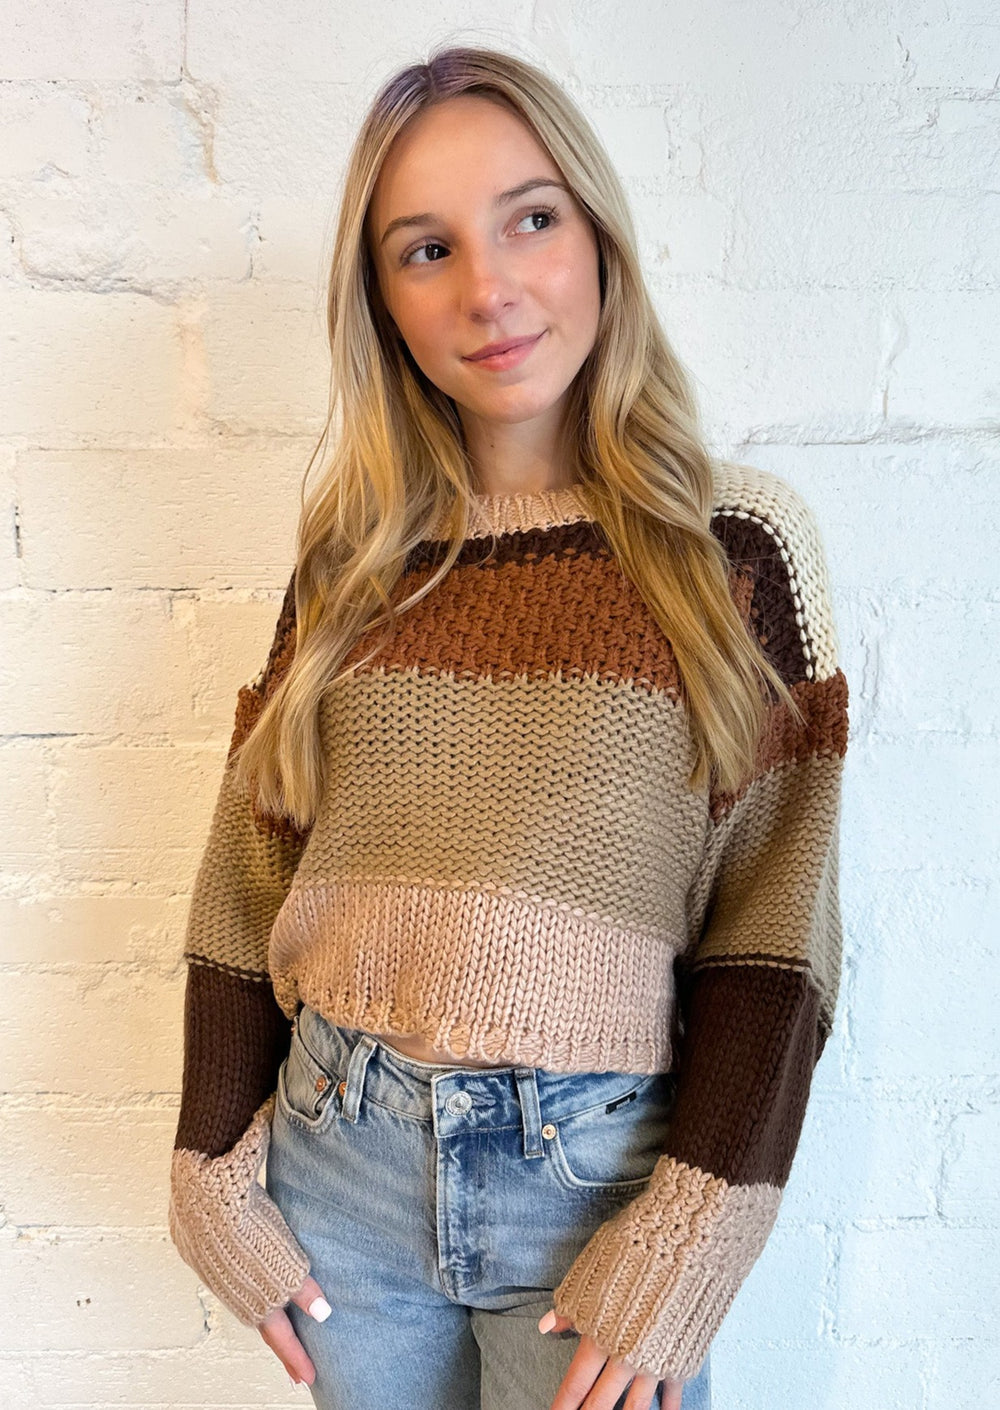 Avery Crop Sweater, Tops, Adeline, Adeline, dallas boutique, dallas texas, texas boutique, women's boutique dallas, adeline boutique, dallas boutique, trendy boutique, affordable boutique